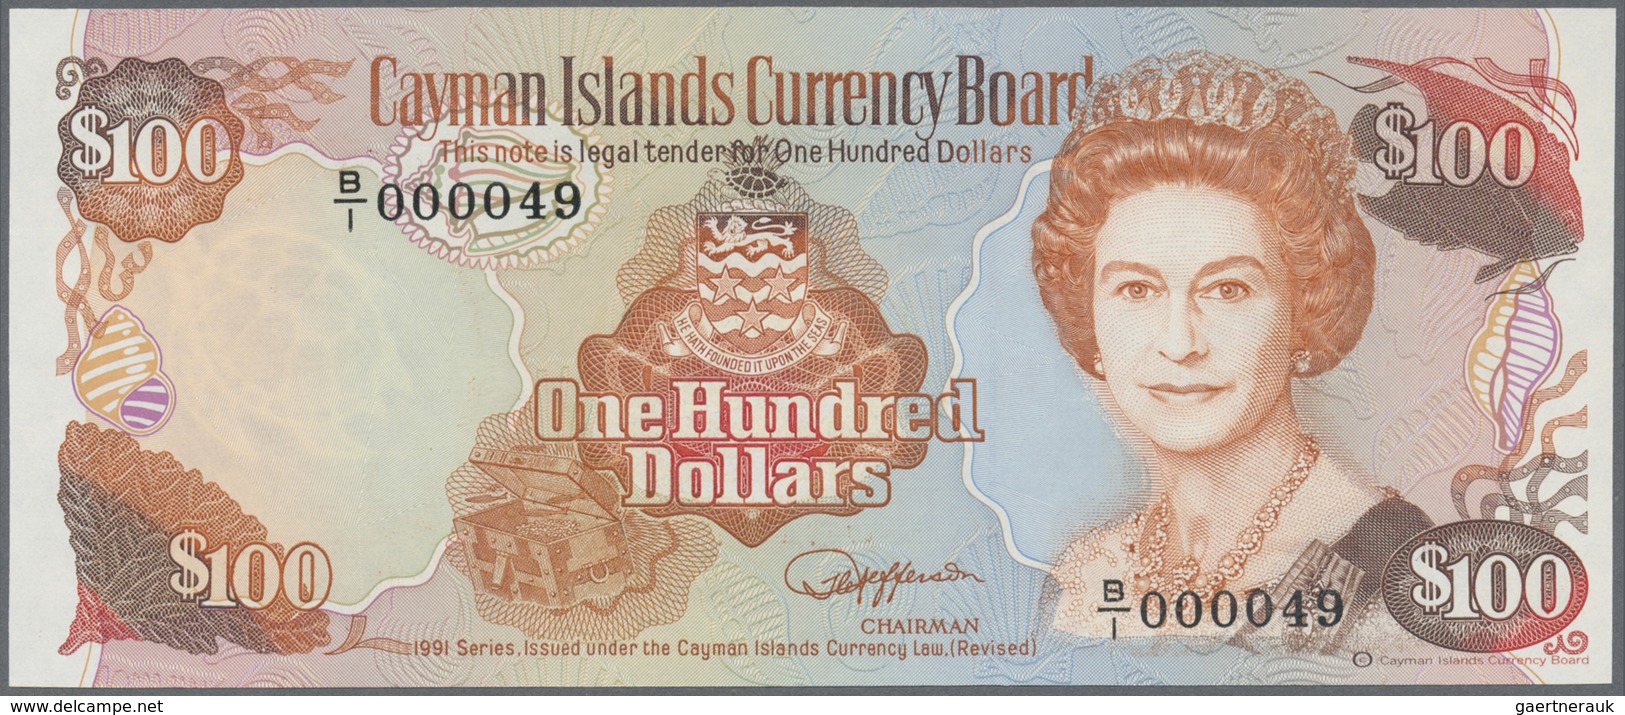 Cayman Islands: Set with 4 Banknotes 1991 series with Matching Low Serial number $5, $10, $25, $100,